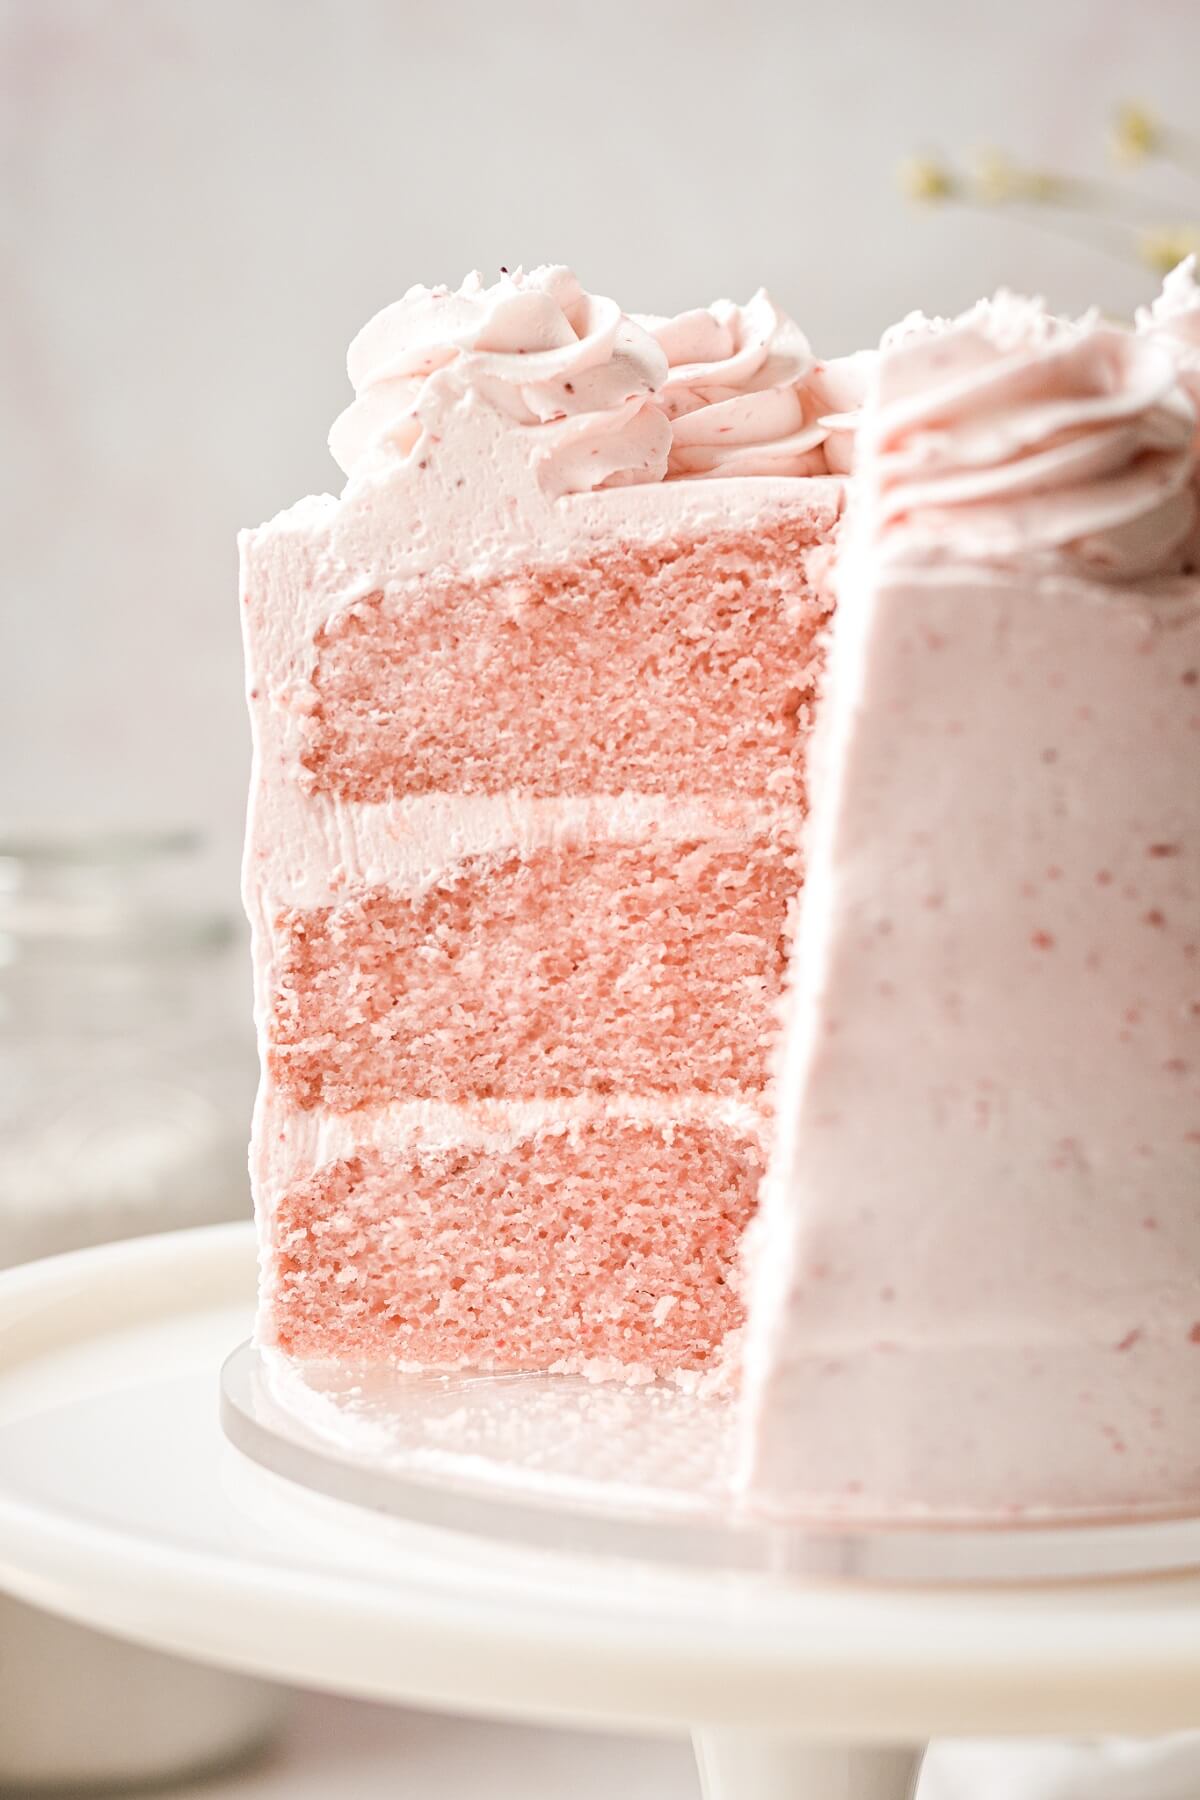 Strawberry cake with a slice cut.